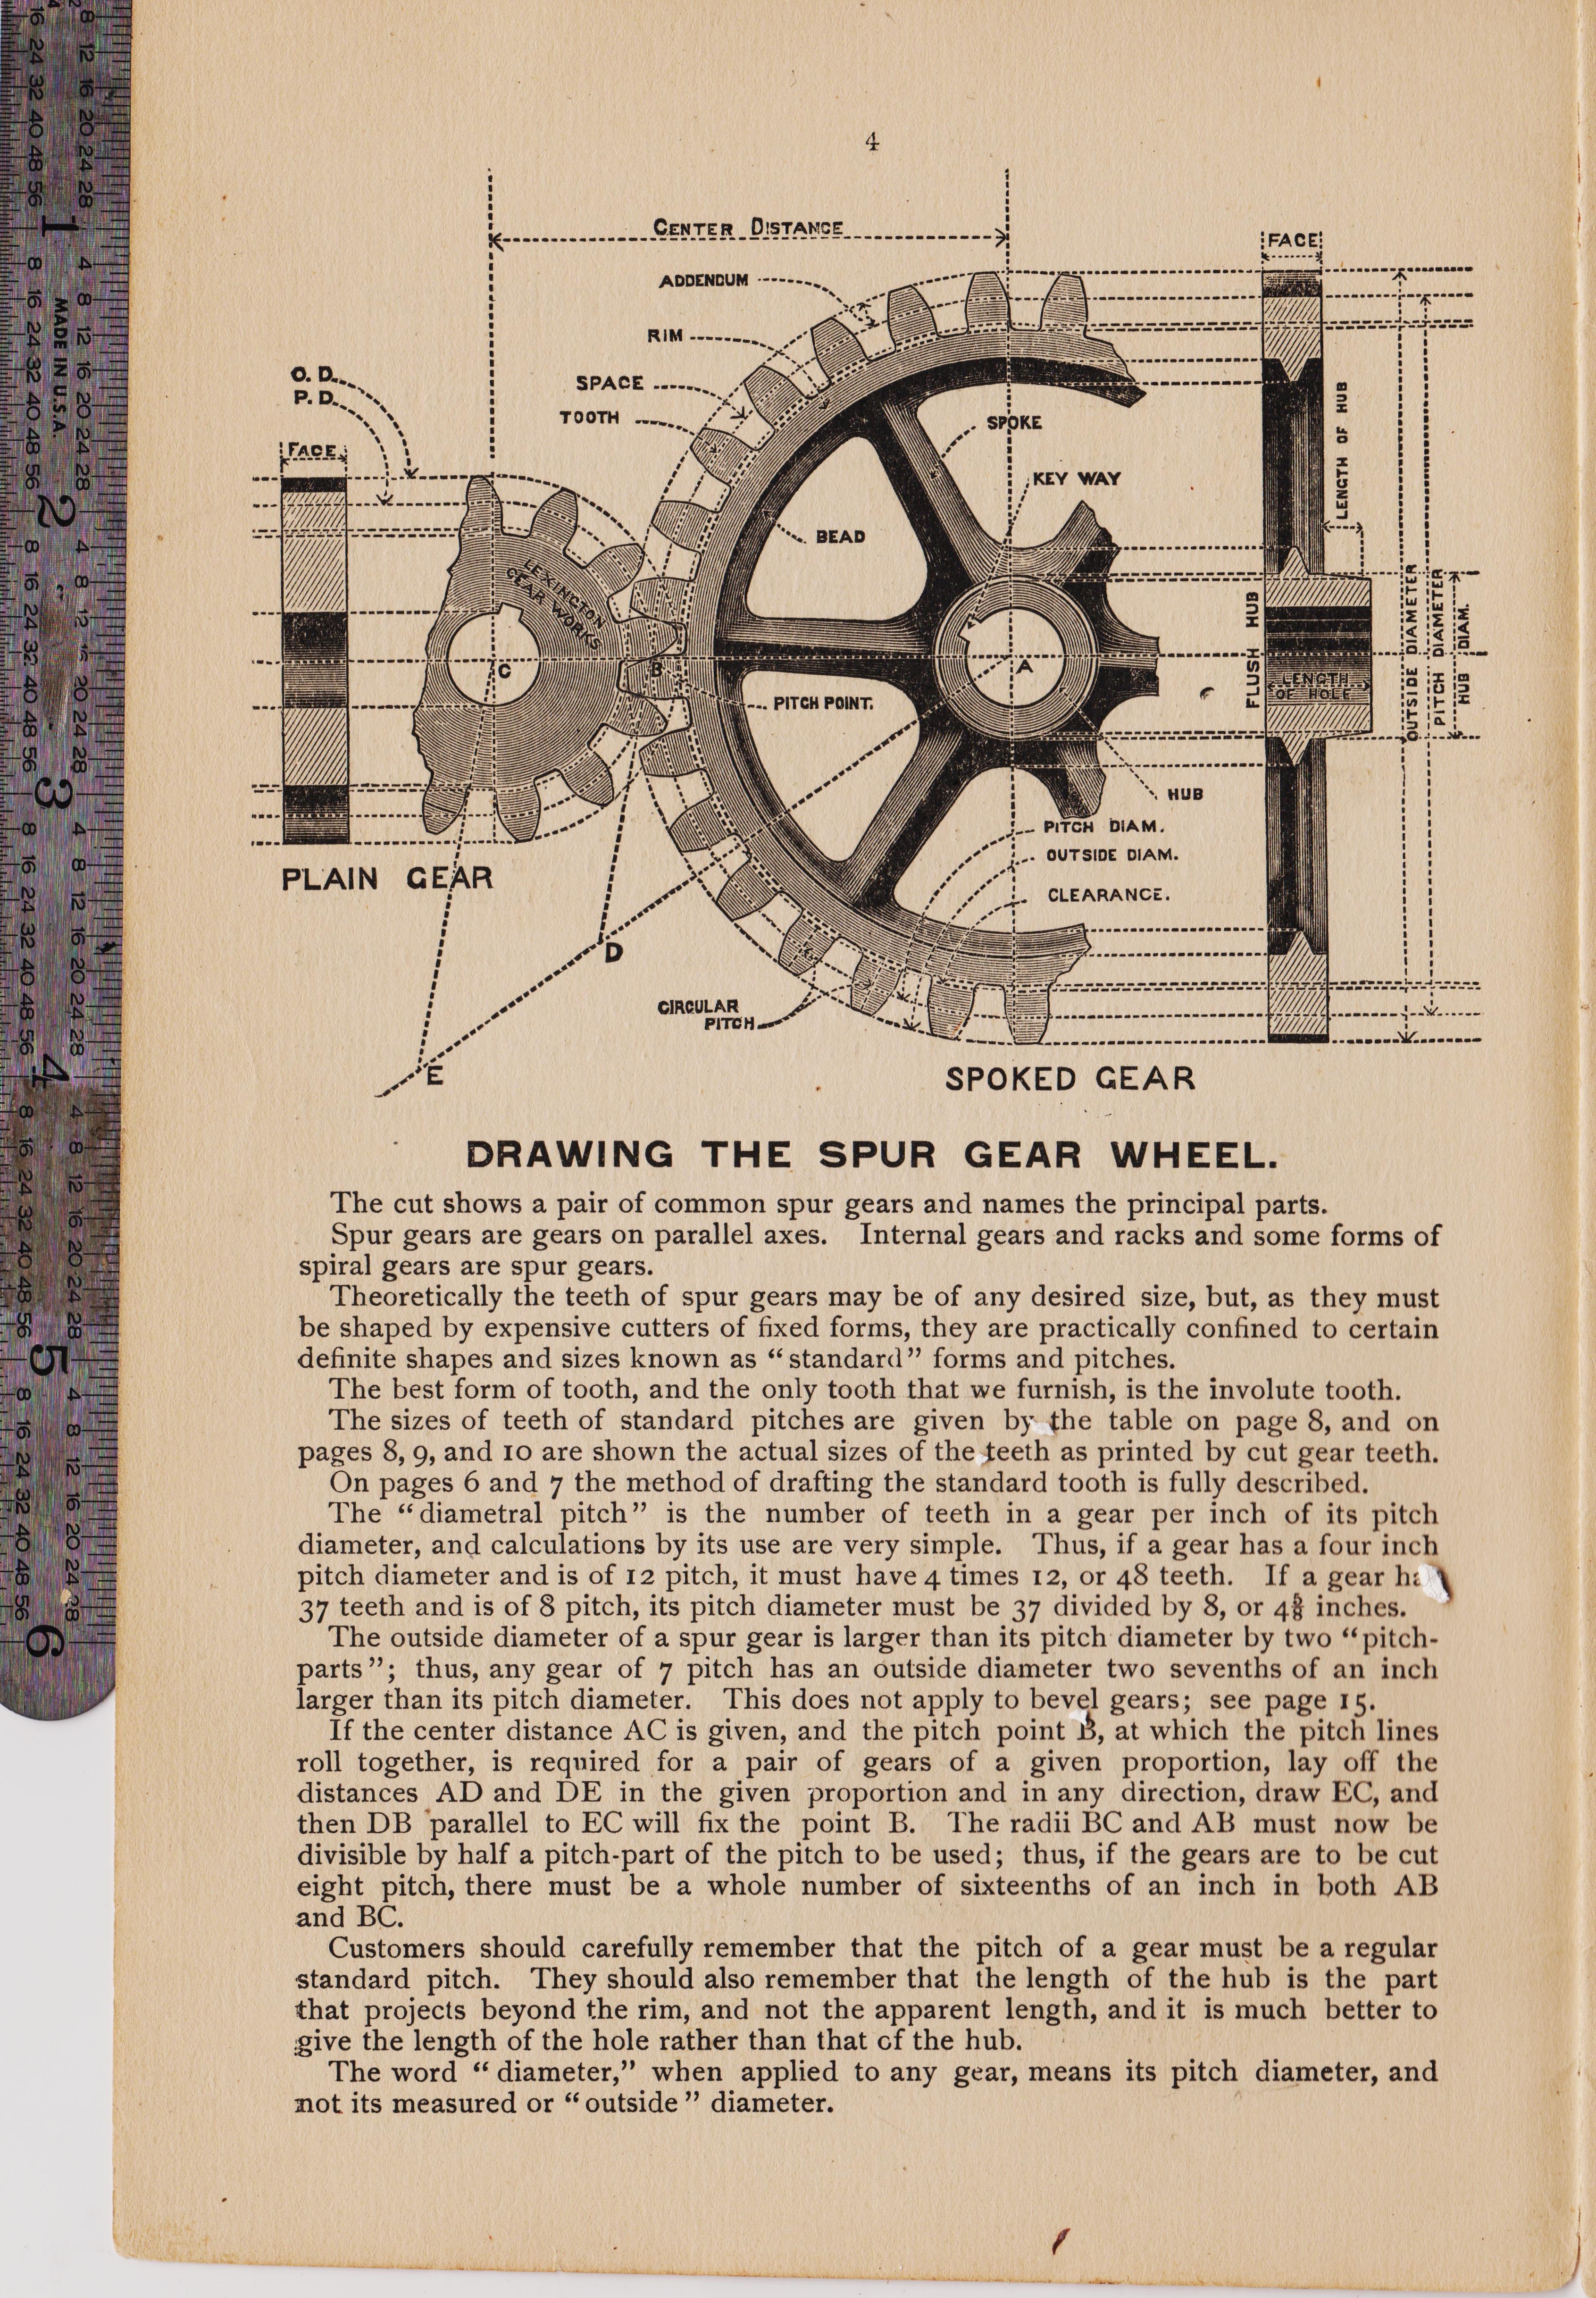 http://antiquemachinery.com/images-2020/Grants-Gear-Book-Lexington-Gear-Works-1892-page-4-Drawing-the-involute-Standard-spur-gear-set.jpg